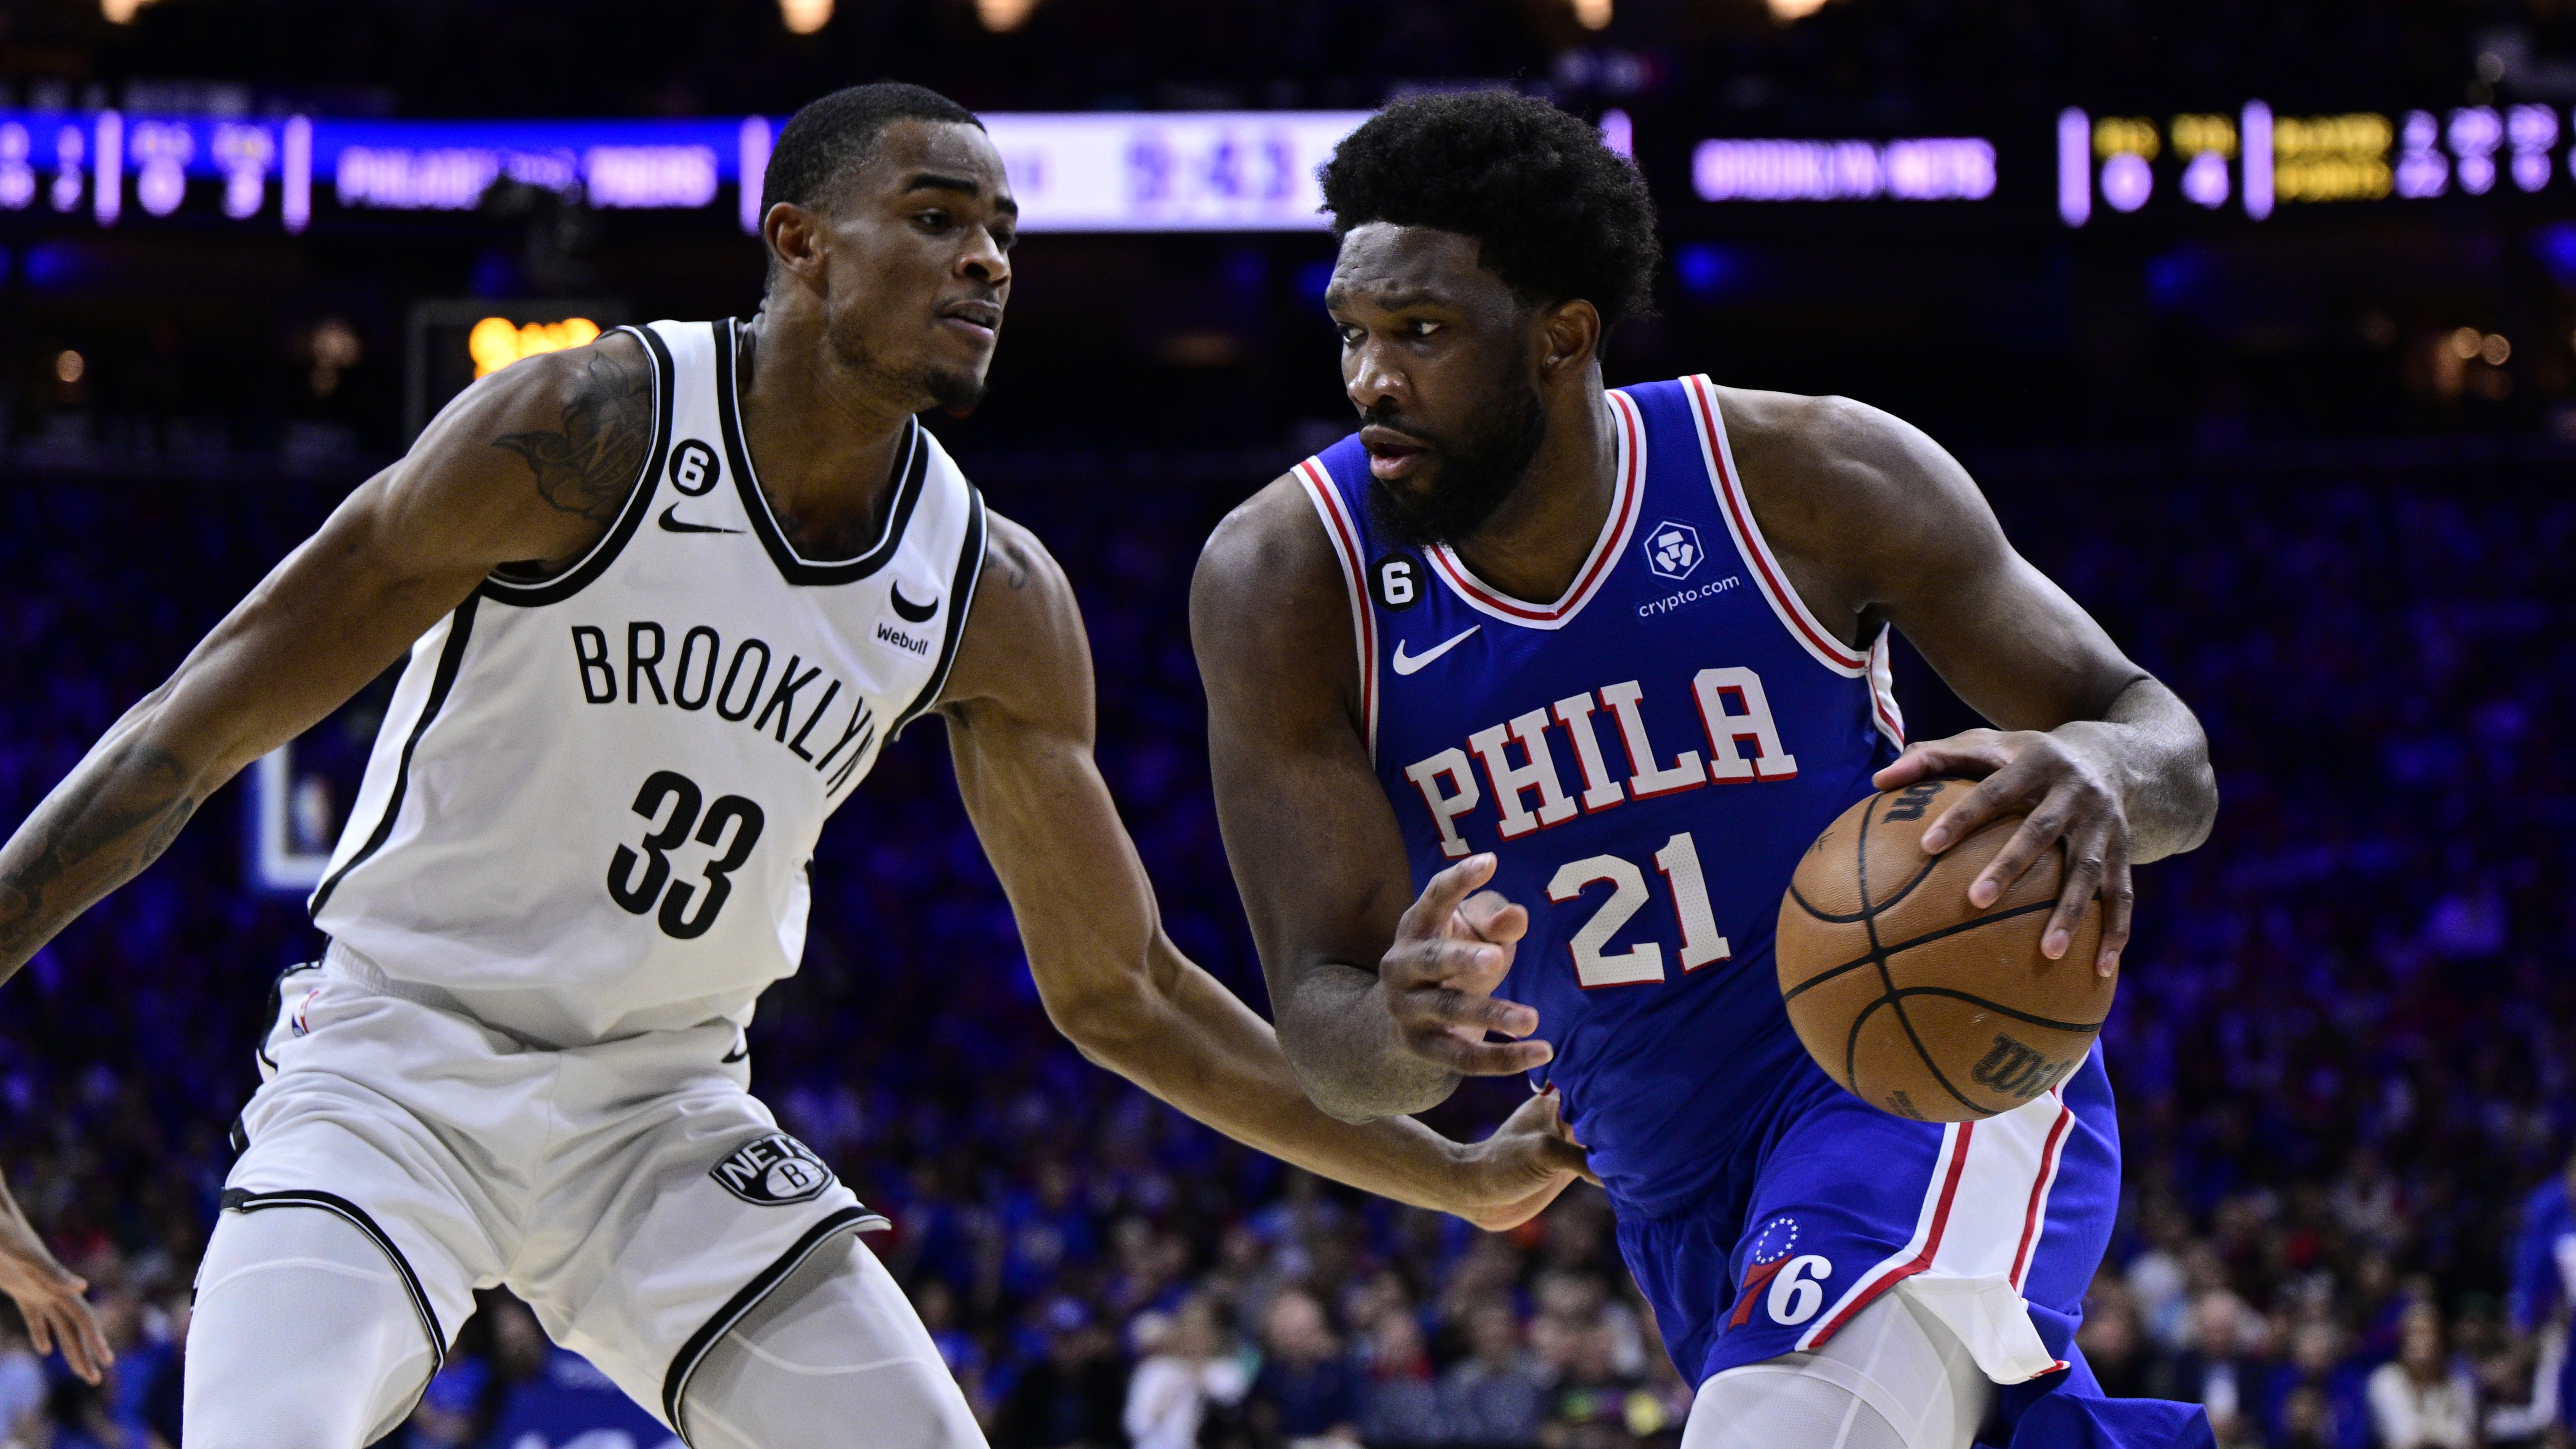 Nets-76ers live stream (4/20) How to watch NBA online, TV, time